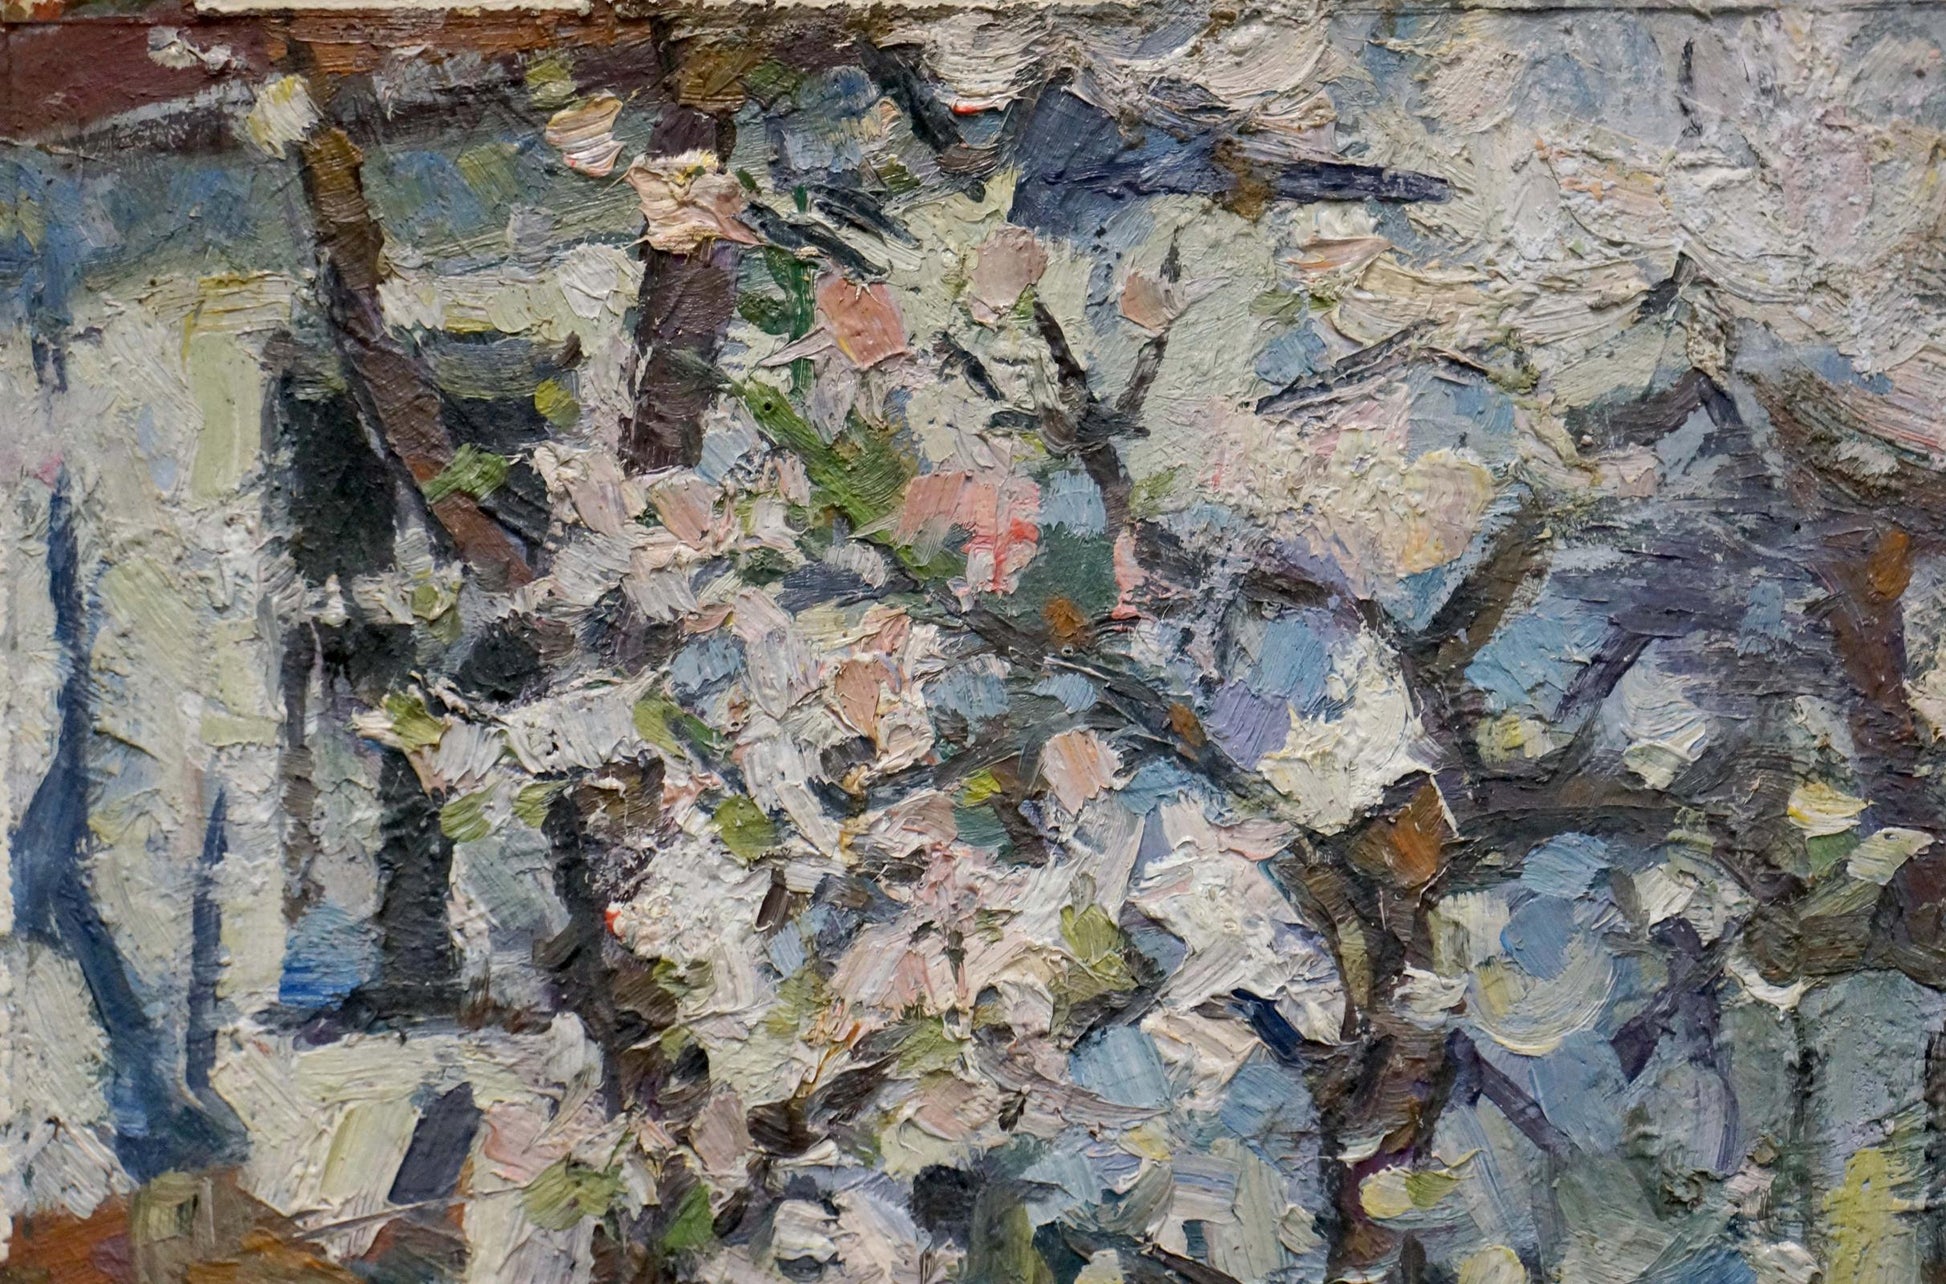 In Sergey Alexandrovich Dupliy's oil painting, we glimpse a landscape through the yard